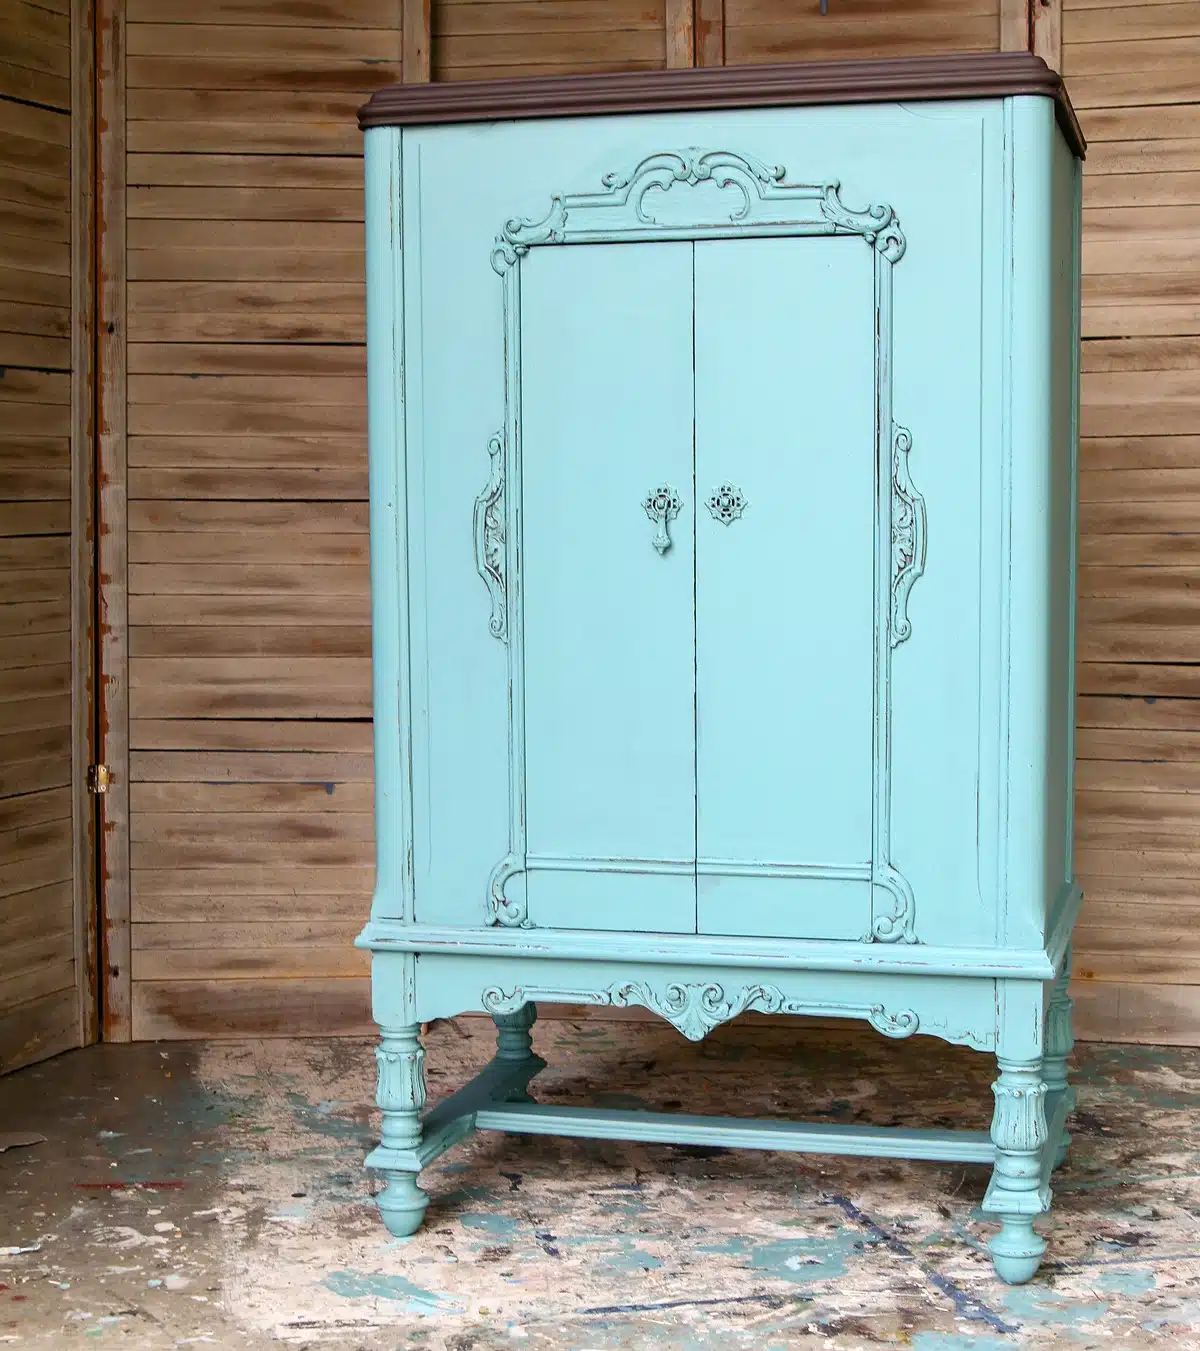 How to paint vintage furniture with latex paint and distress with wet wipes